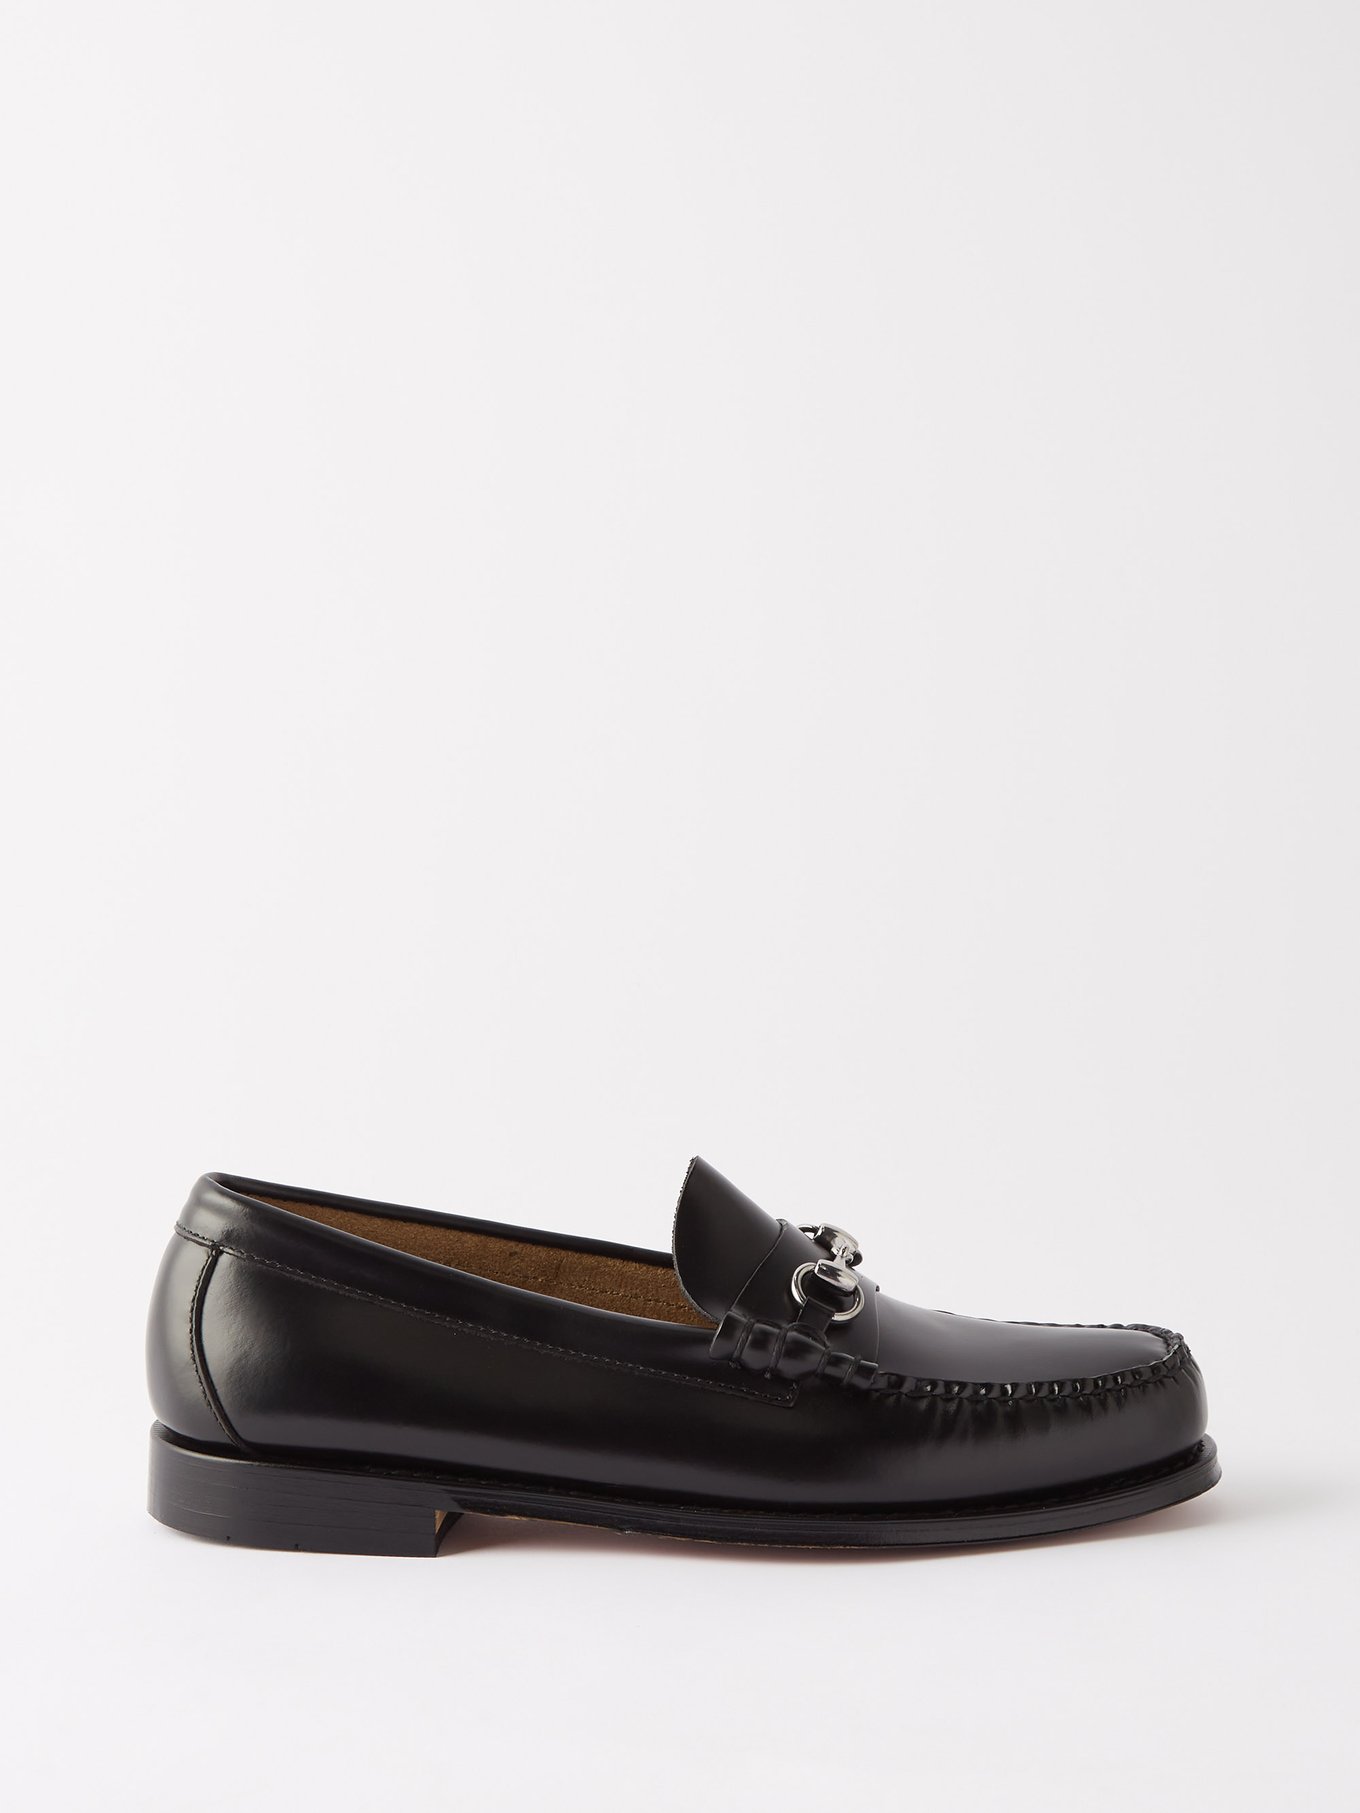 Weejuns Heritage Lincoln leather loafers | G.H. BASS